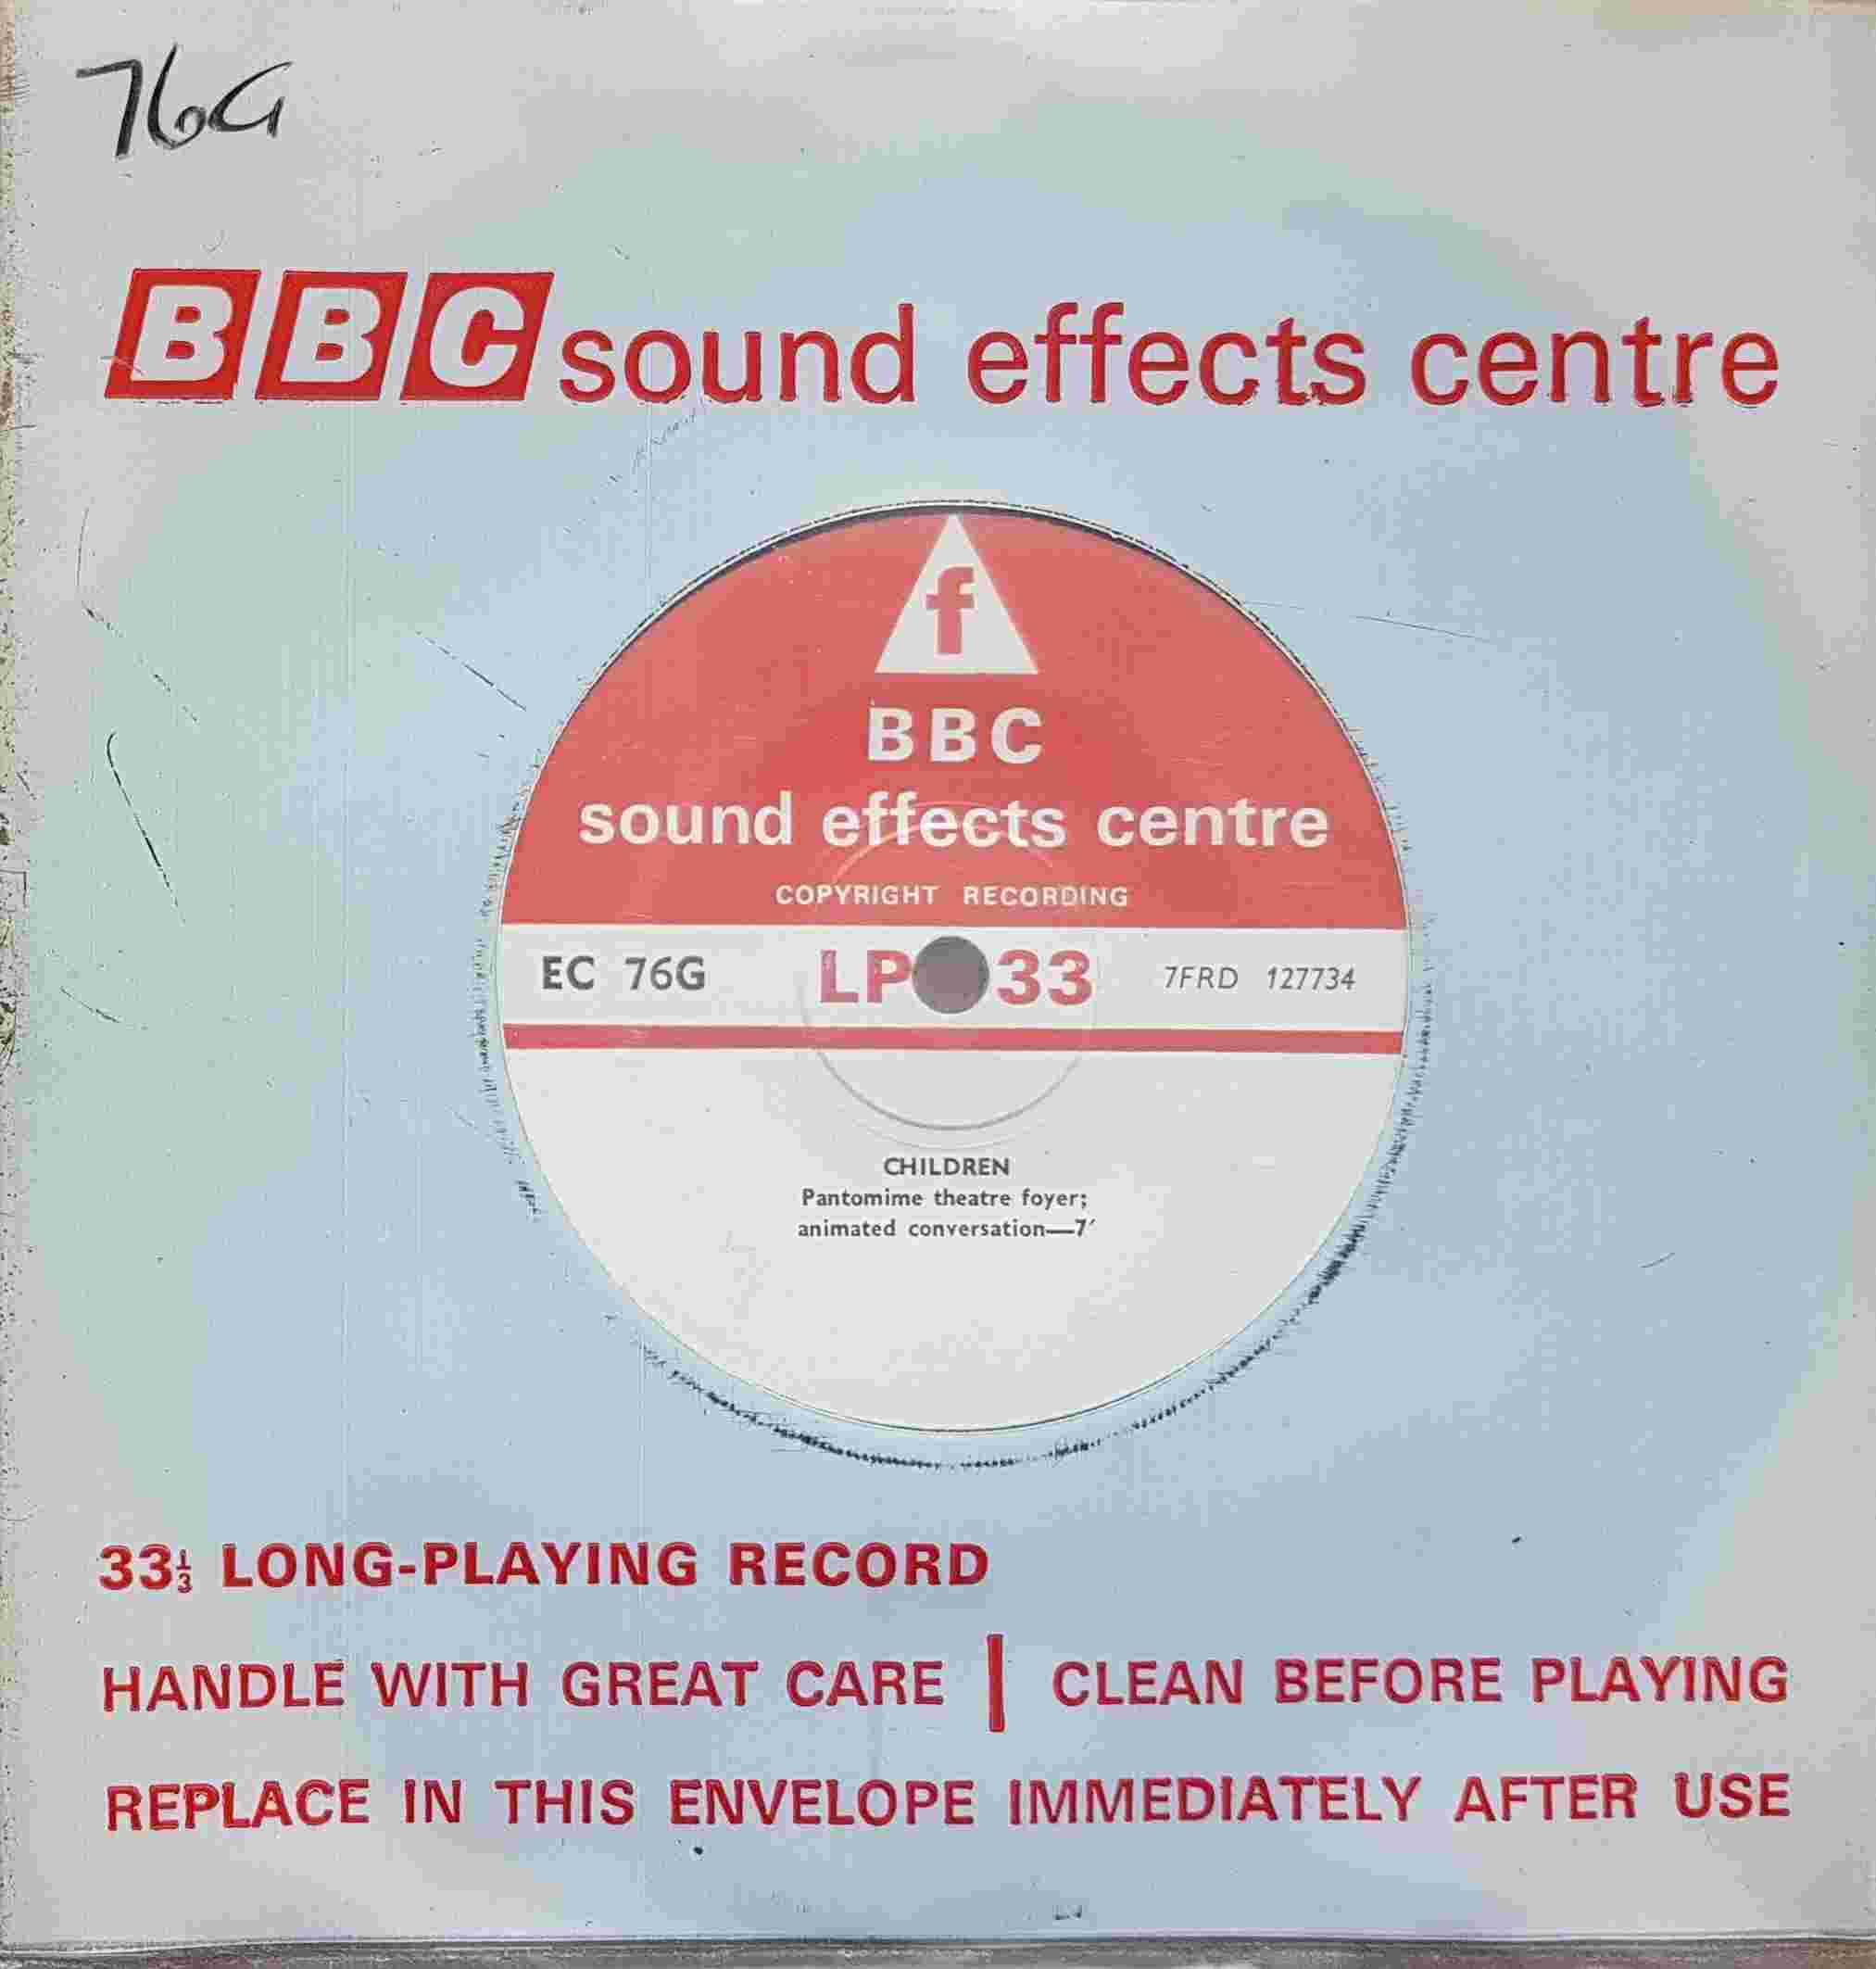 Picture of EC 76G Children by artist Not registered from the BBC singles - Records and Tapes library